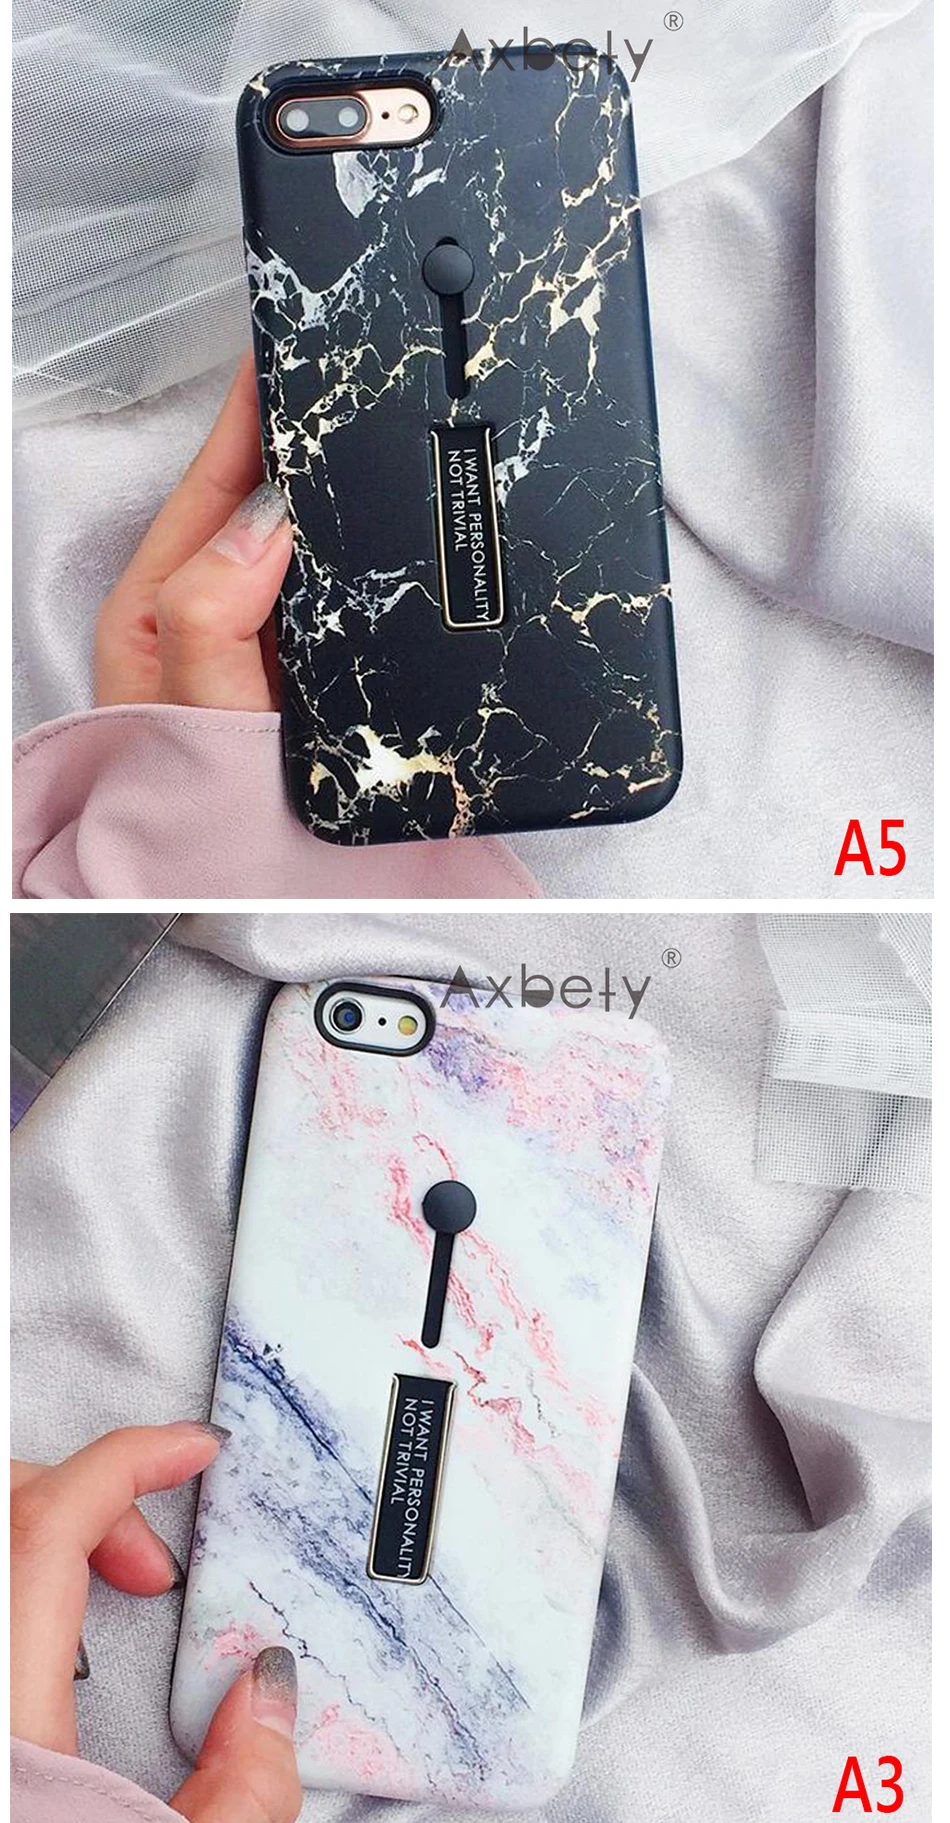 AXBETY For iphone 6s 6 7 8 Plus / XS MAX/XR Fashion Marble silicon Ring Phone Cases For iphone 7 Case Hide Stand Holder Cover 6S